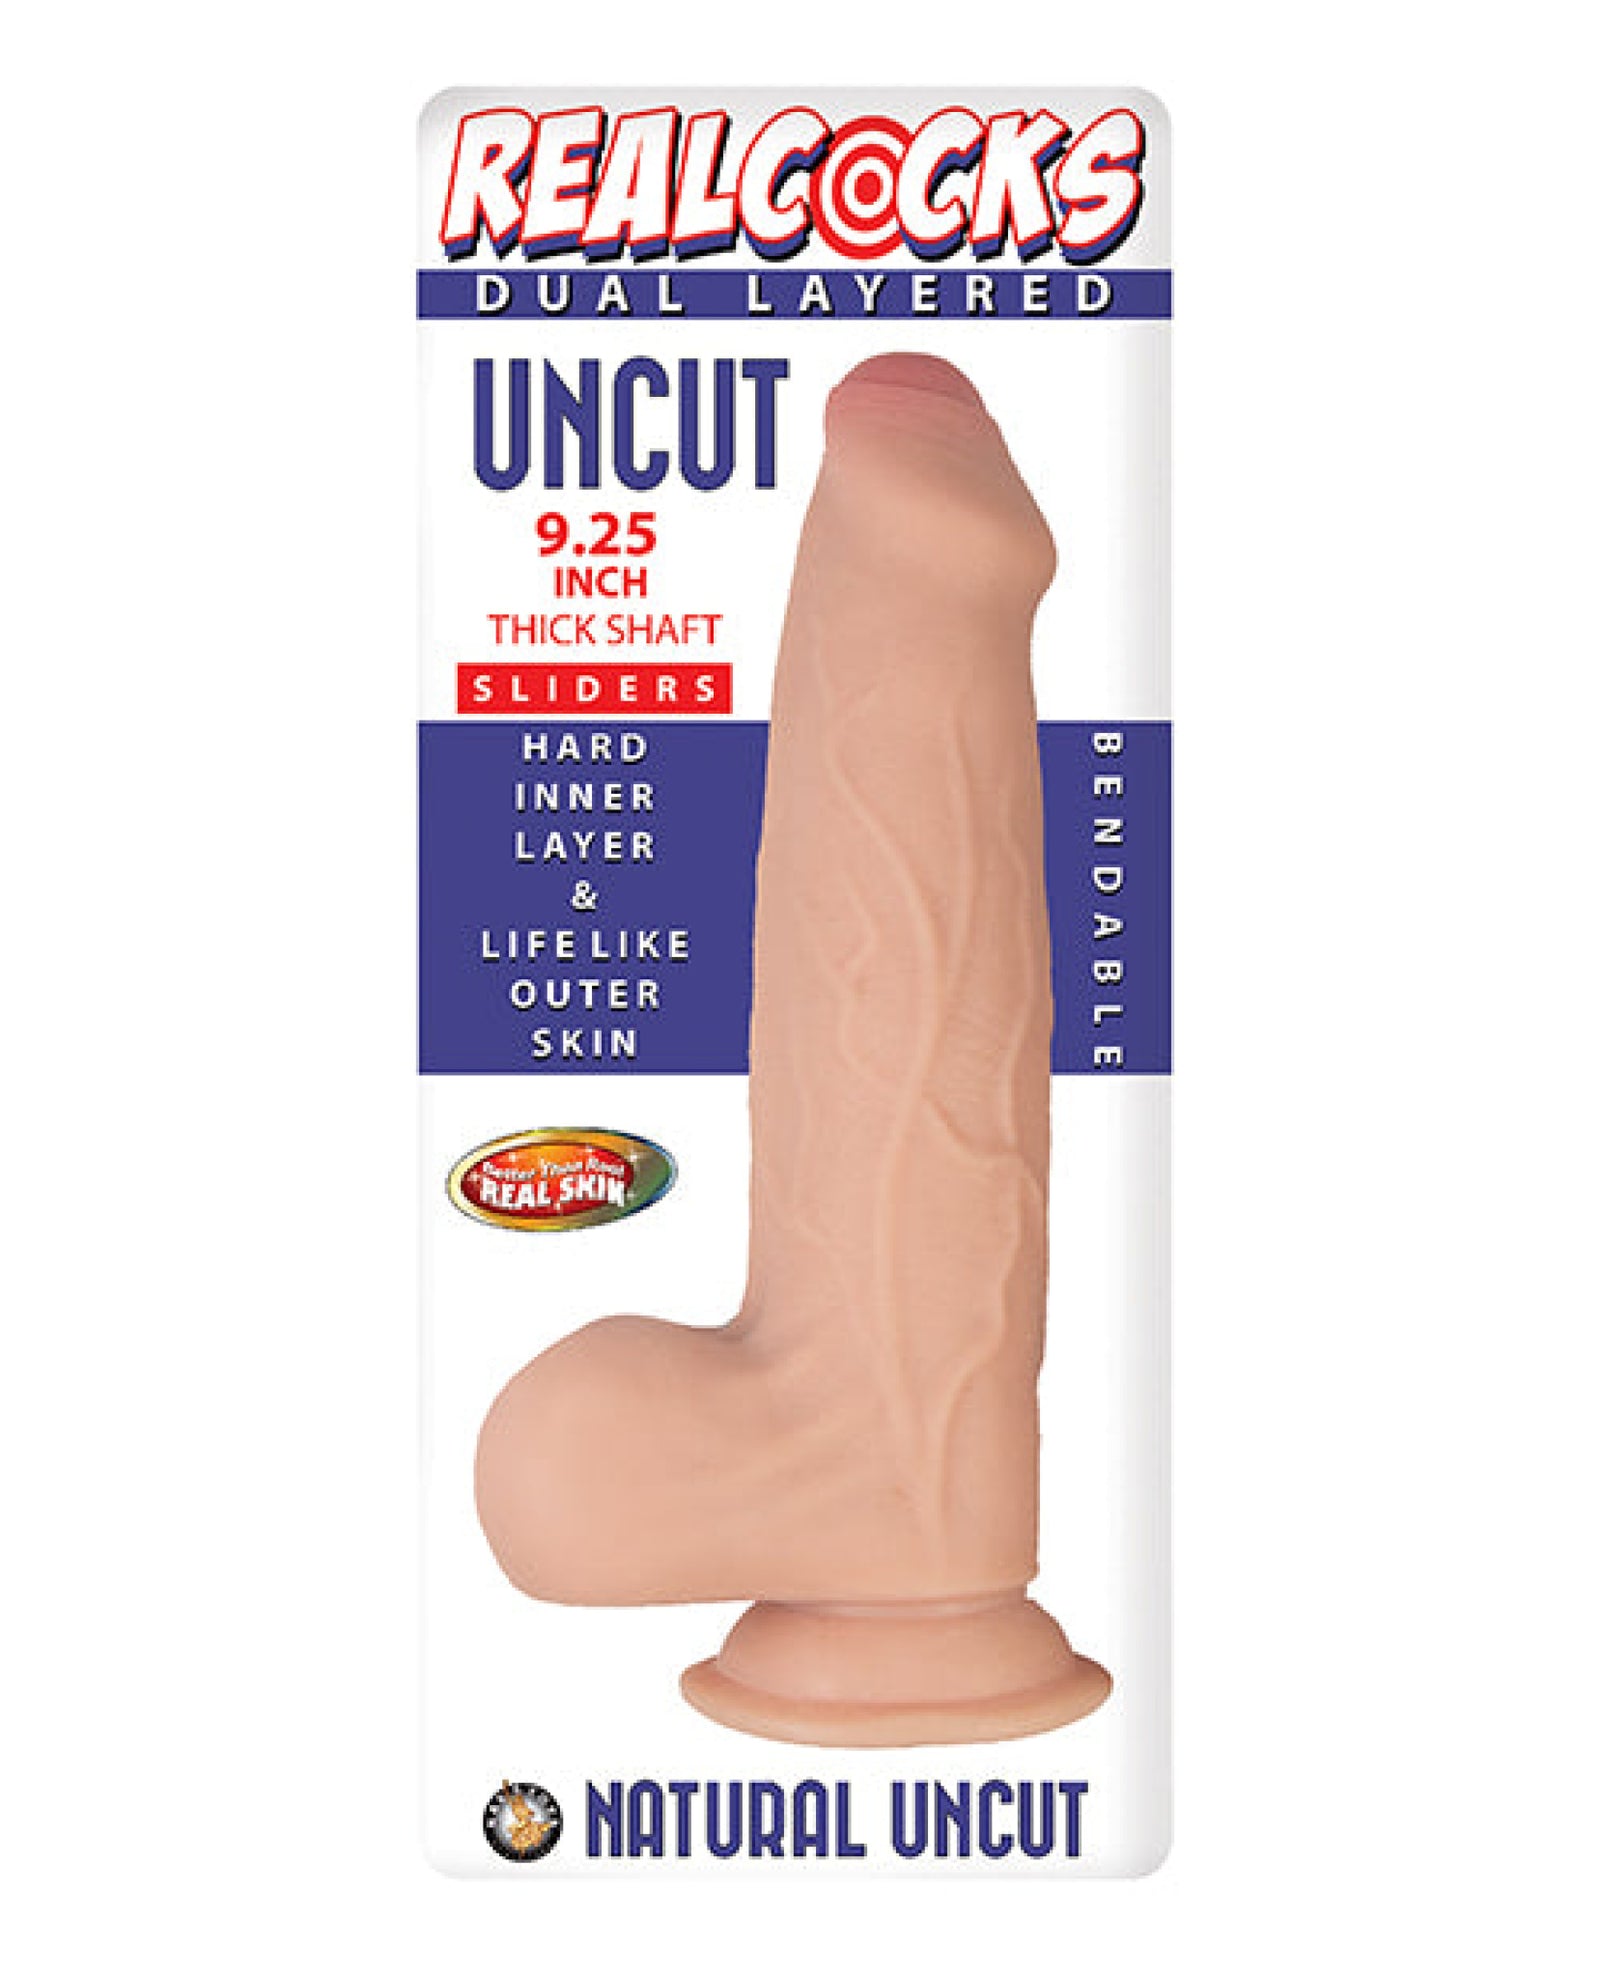 Realcocks Dual Layered Uncut Sliders 9.25" Thick Shaft Nasstoys